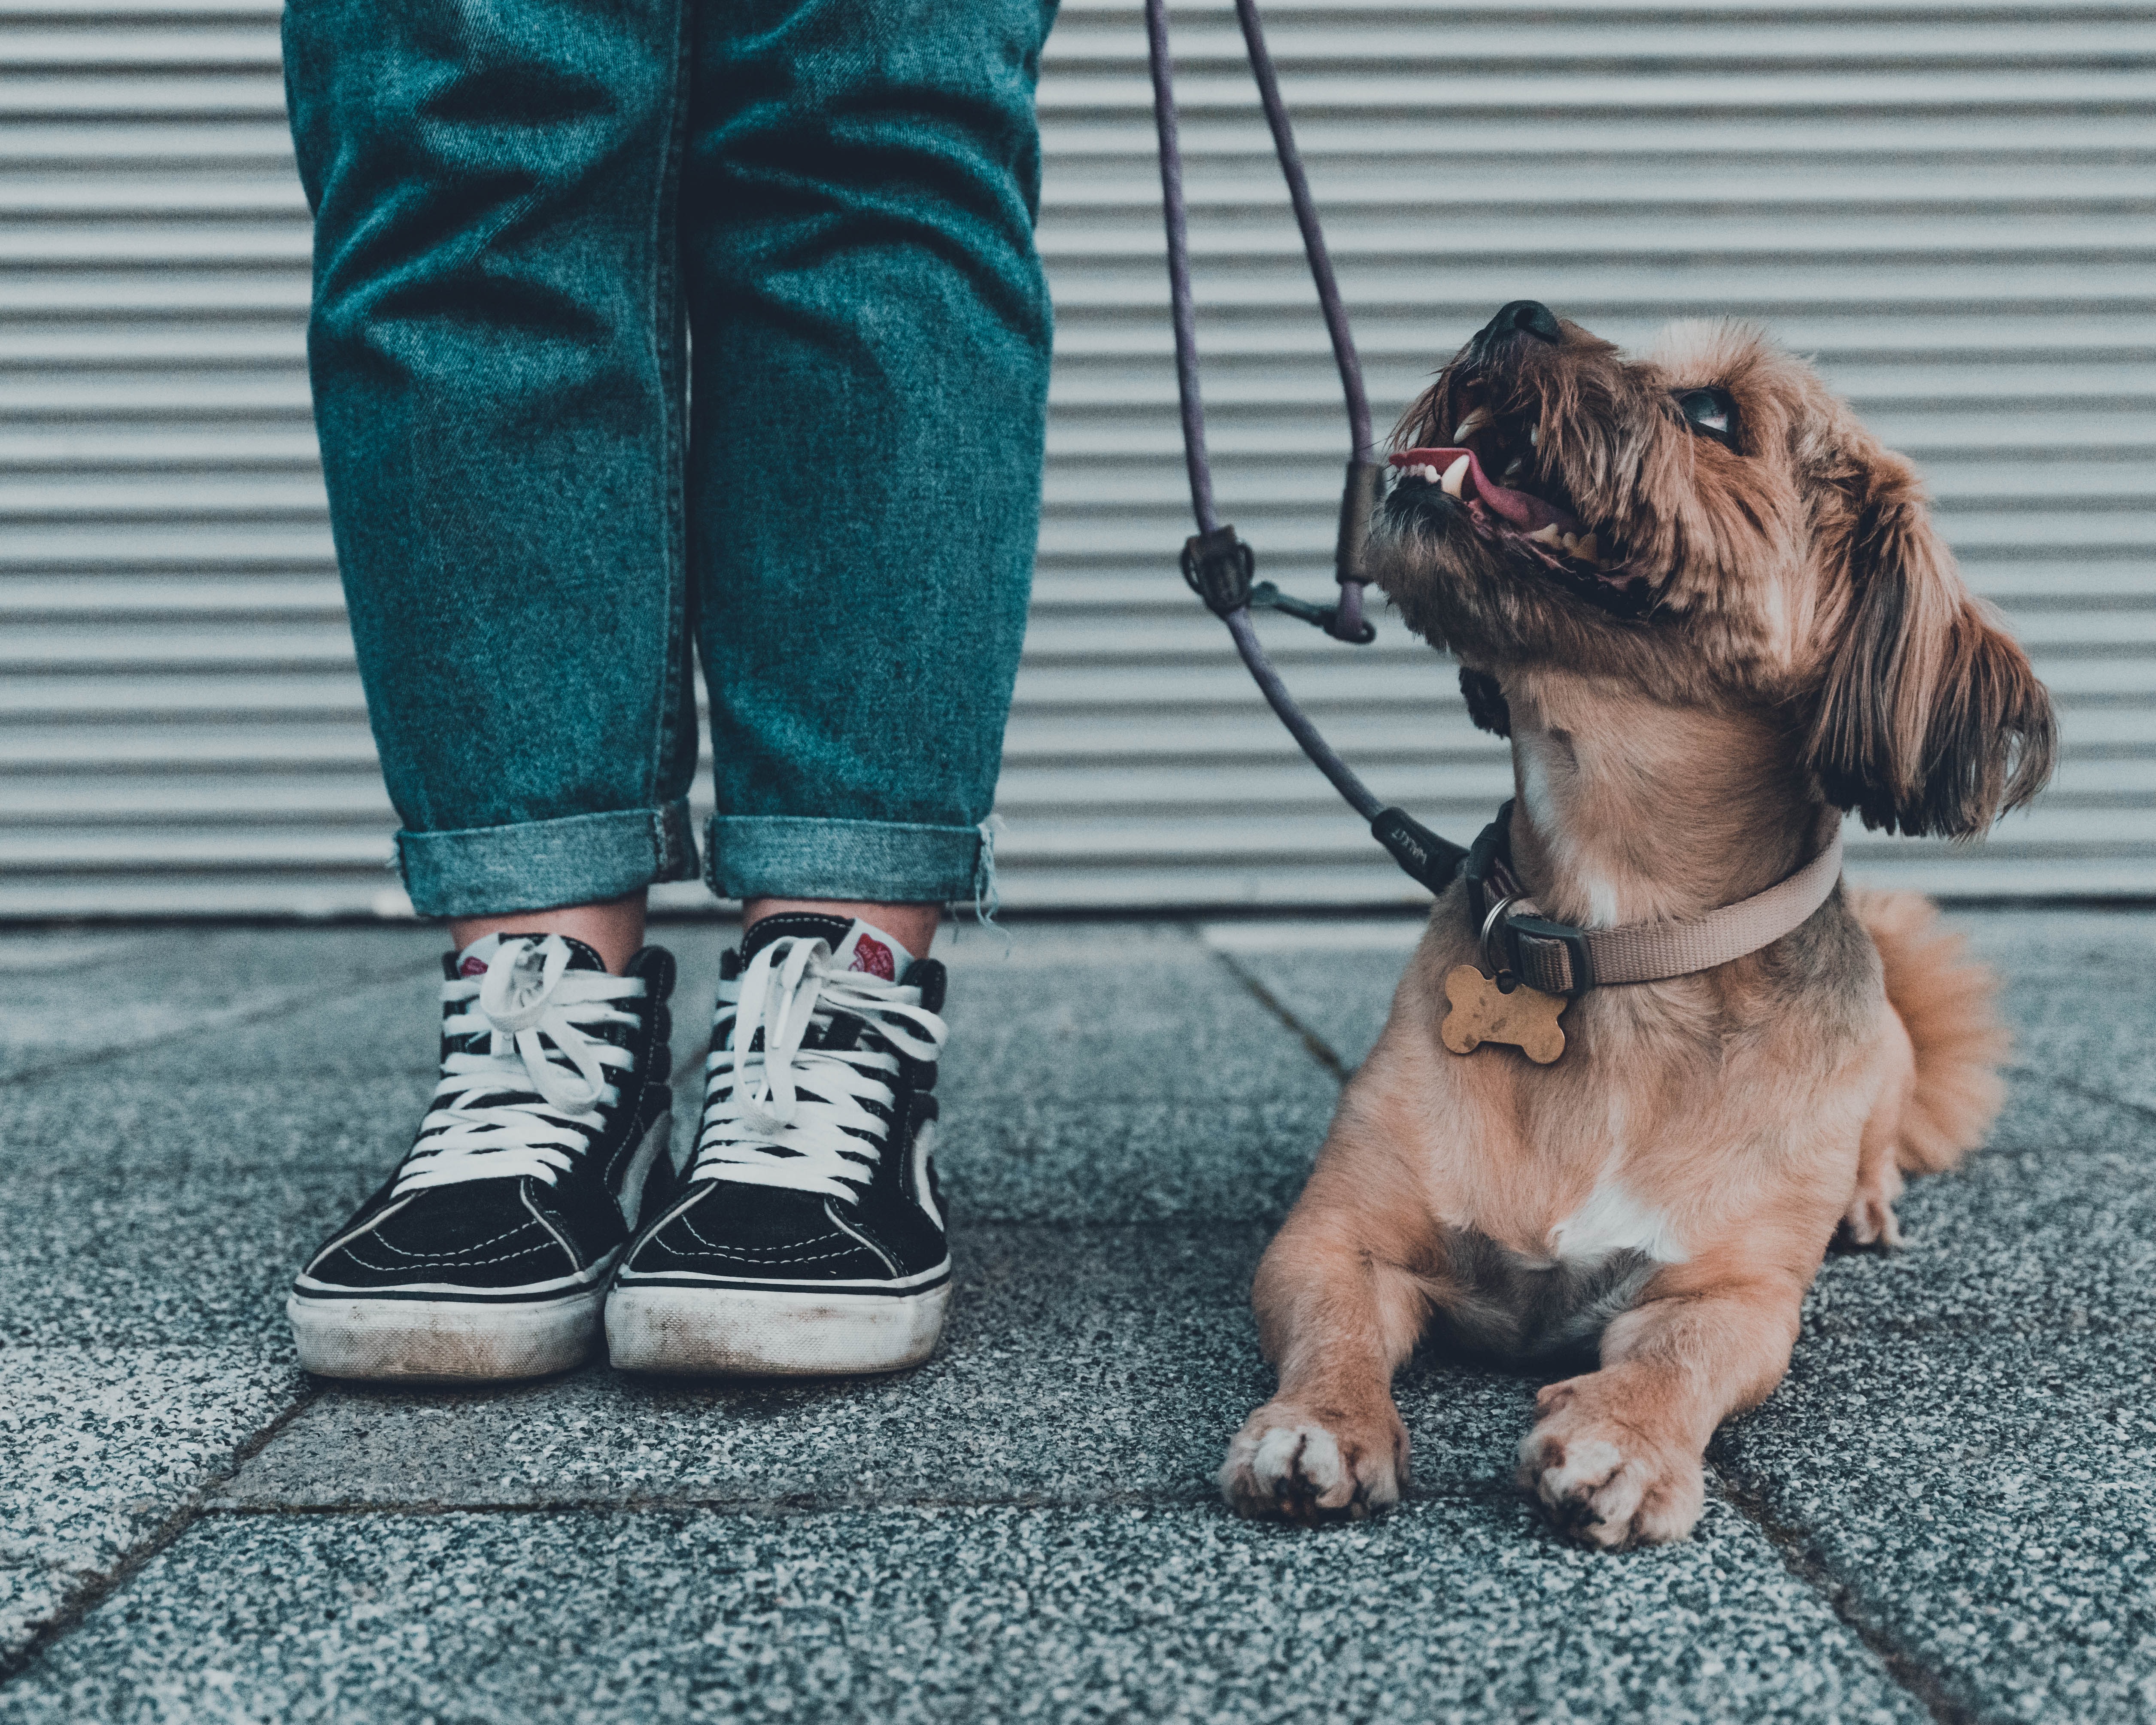 dog wearing a collar and leash heeling next to a human